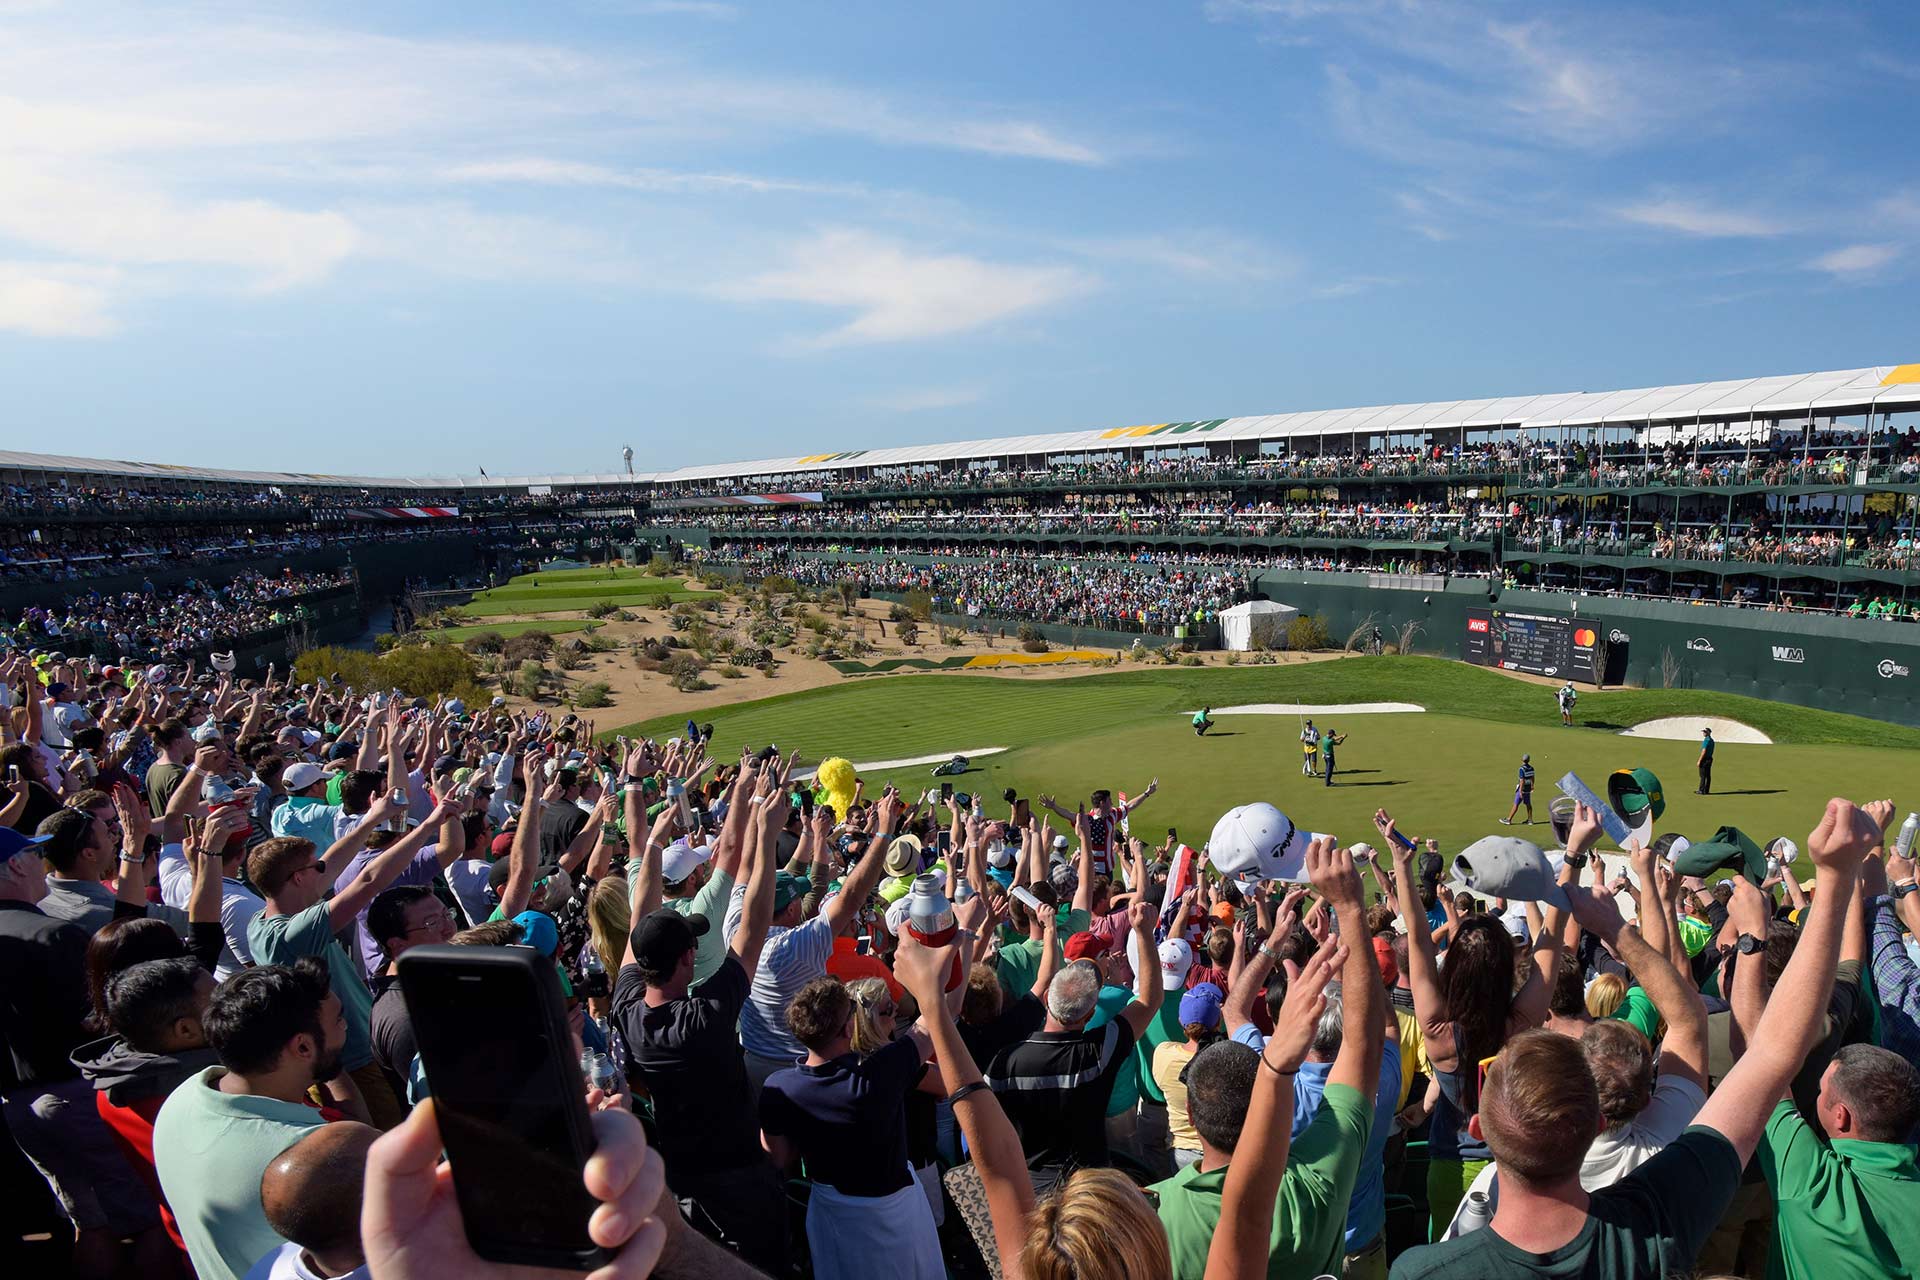 Fans Can Now Use Mobile Devices for Pictures, Video Every Day at the Waste Management Phoenix Open